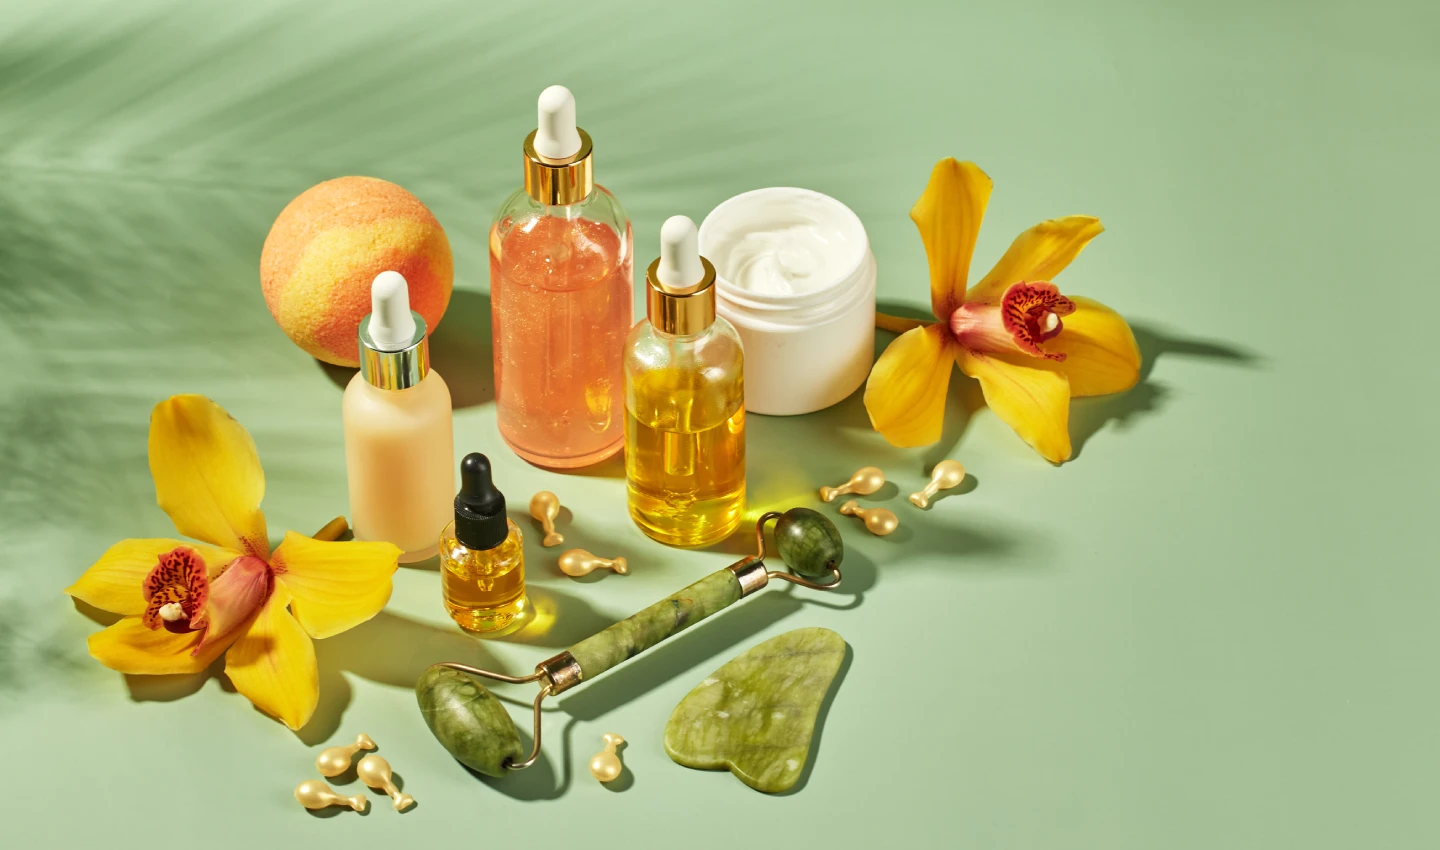 Bottles of vitamin-enriched skincare serums and creams on a light background